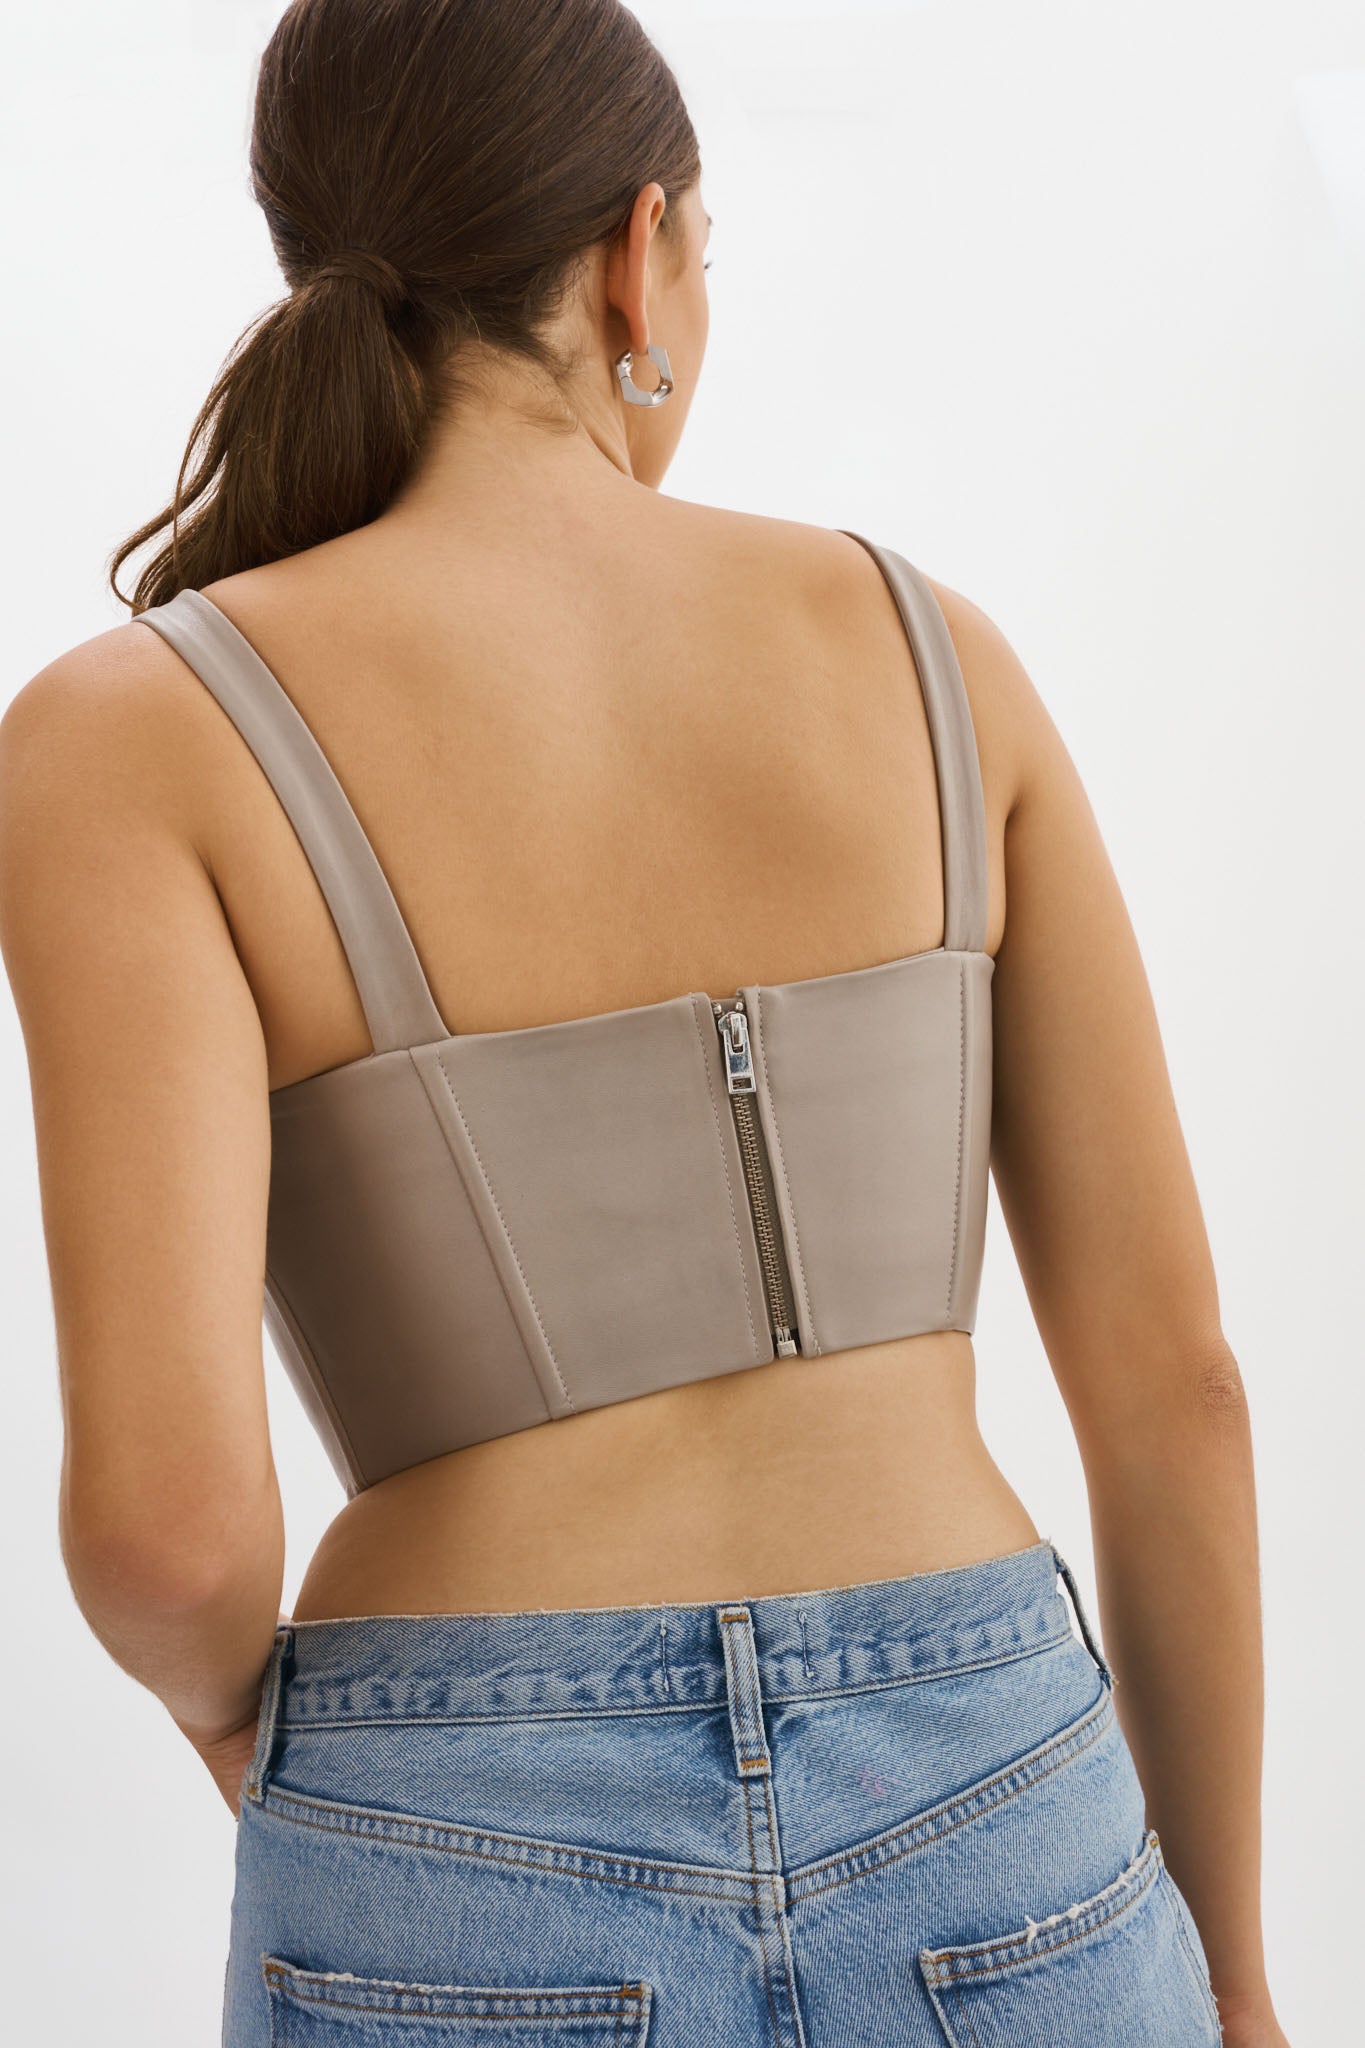 Urban Outfitters Corset - Gem